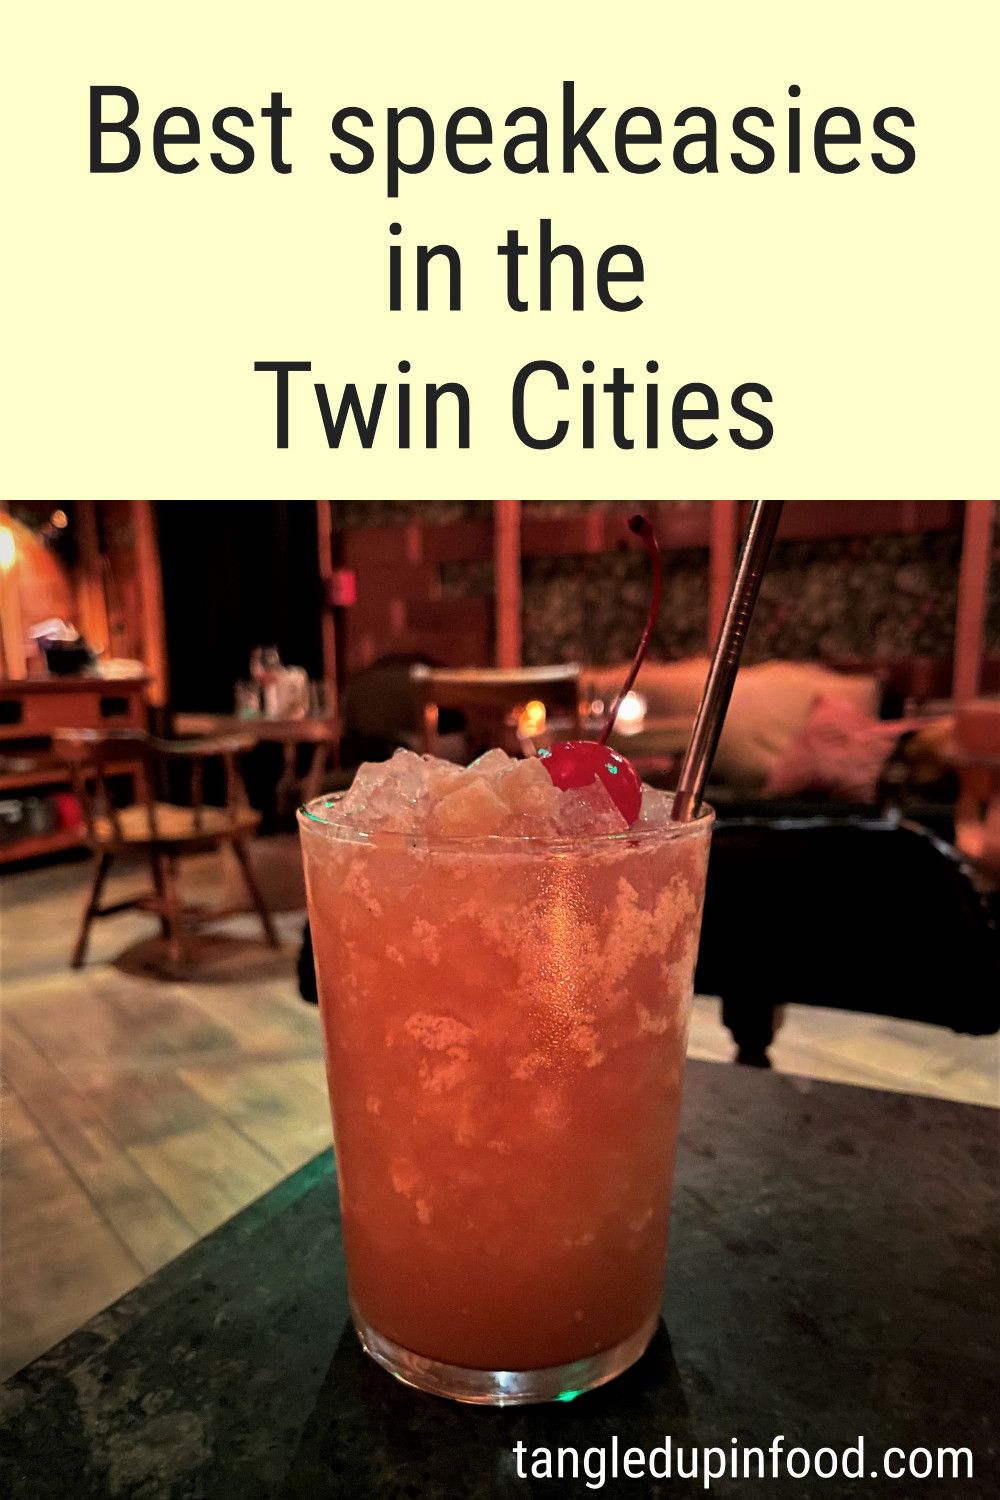 Picture of a cocktail with text reading "Best Speakeasies in the Twin Cities"